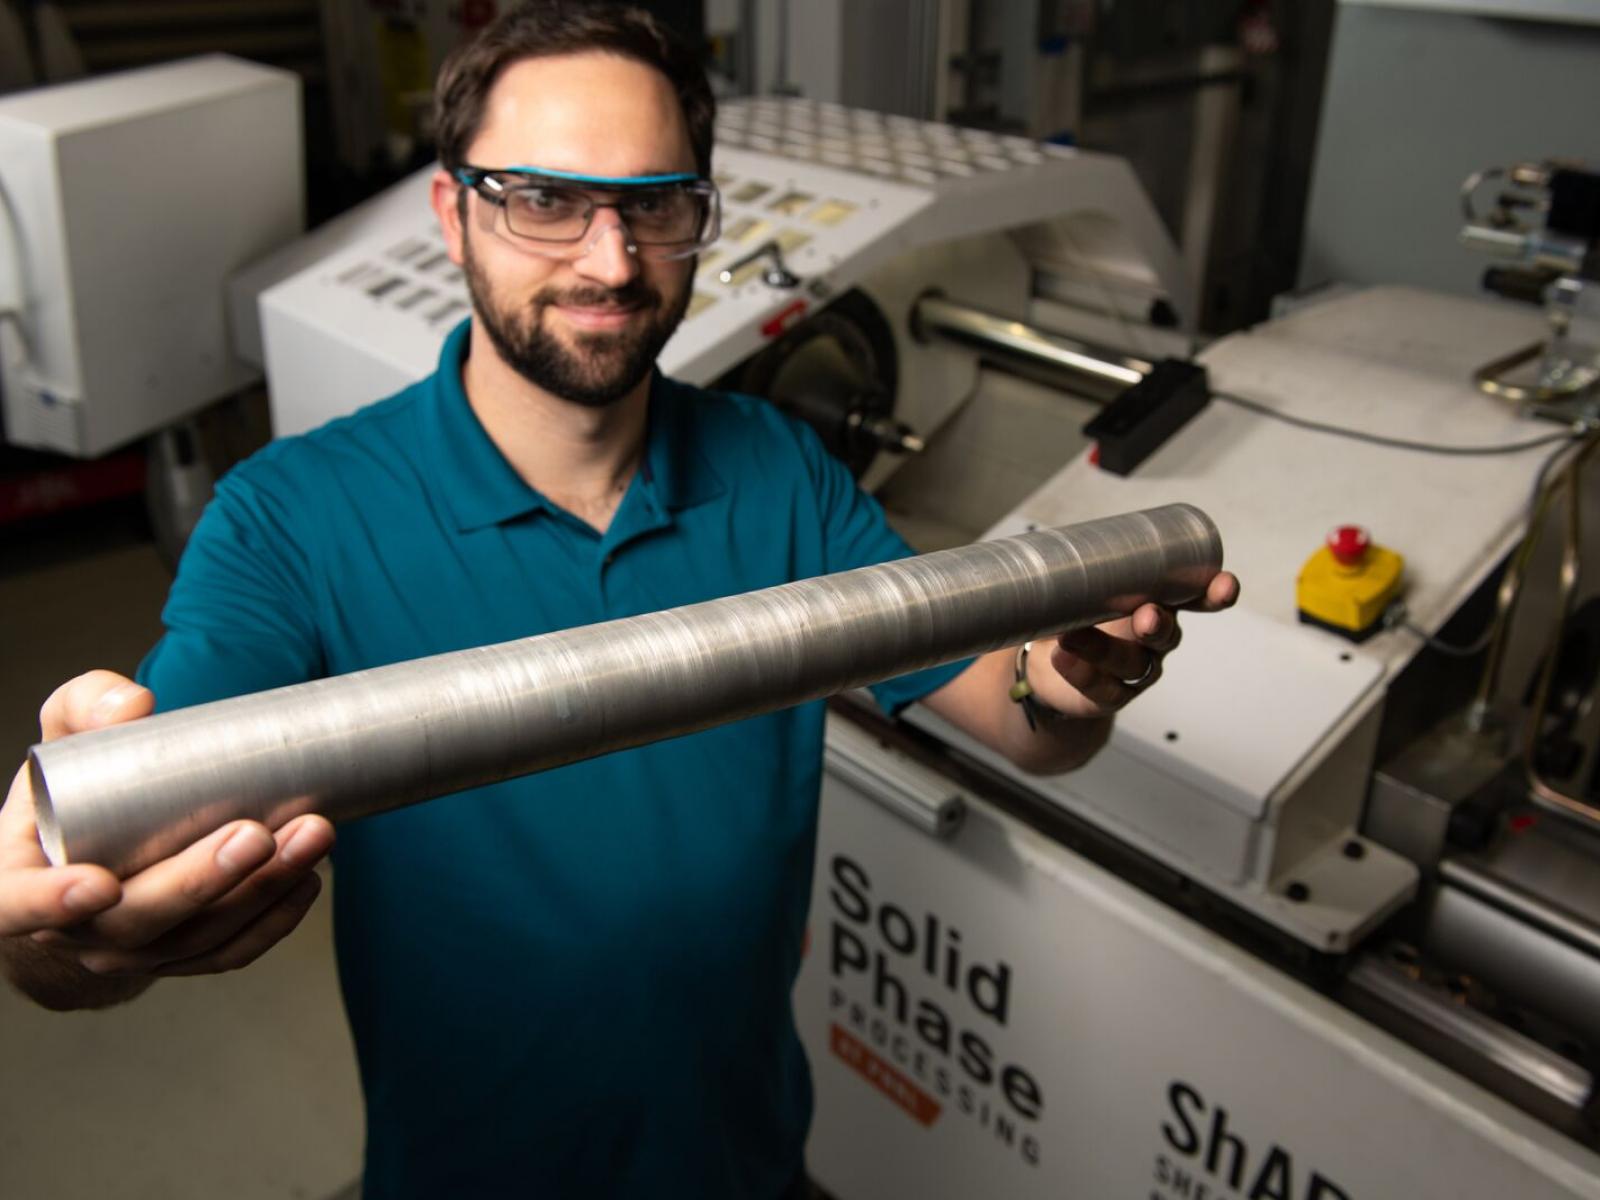 Researcher told tube extruded by ShAPE machine